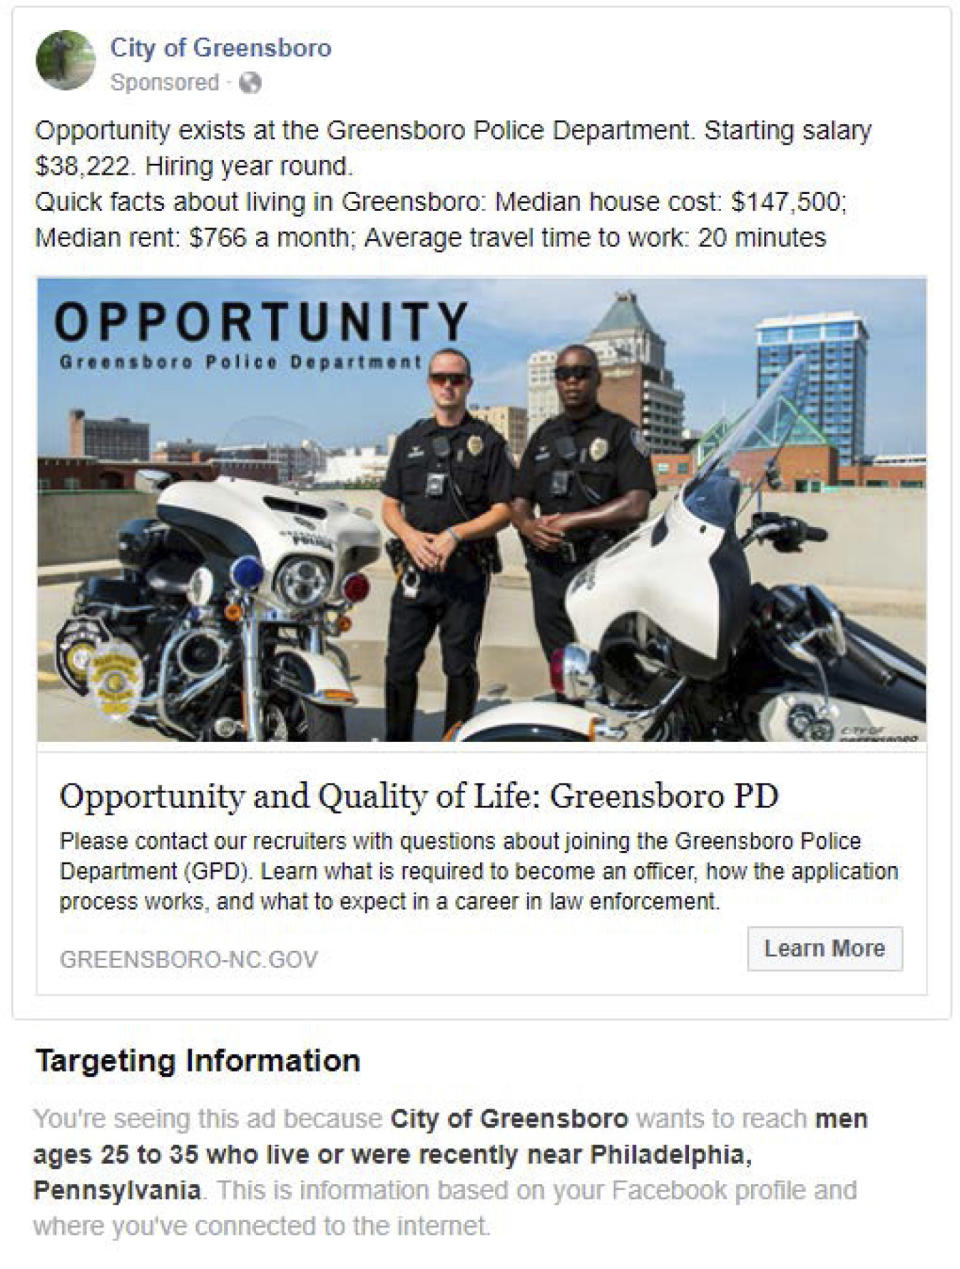 This undated image provided by the American Civil Liberties Union shows a Facebook advertisement for jobs at the the City of Greensboro's police department. The ad placed by the city was targeted to “men ages 25 to 35 who live or were recently near Philadelphia.” Such targeting information is available to Facebook users when they click on “why am I seeing this” on a drop-down menu on the ad. The ACLU accused Facebook of discrimination, saying the company violated federal and state laws prohibiting businesses from excluding women from job ads. In a complaint filed Tuesday, Sept. 18, 2018, the ACLU also lists 10 employers that it claims have placed discriminatory ads including the Greensboro ad. (American Civil Liberties Union via AP)